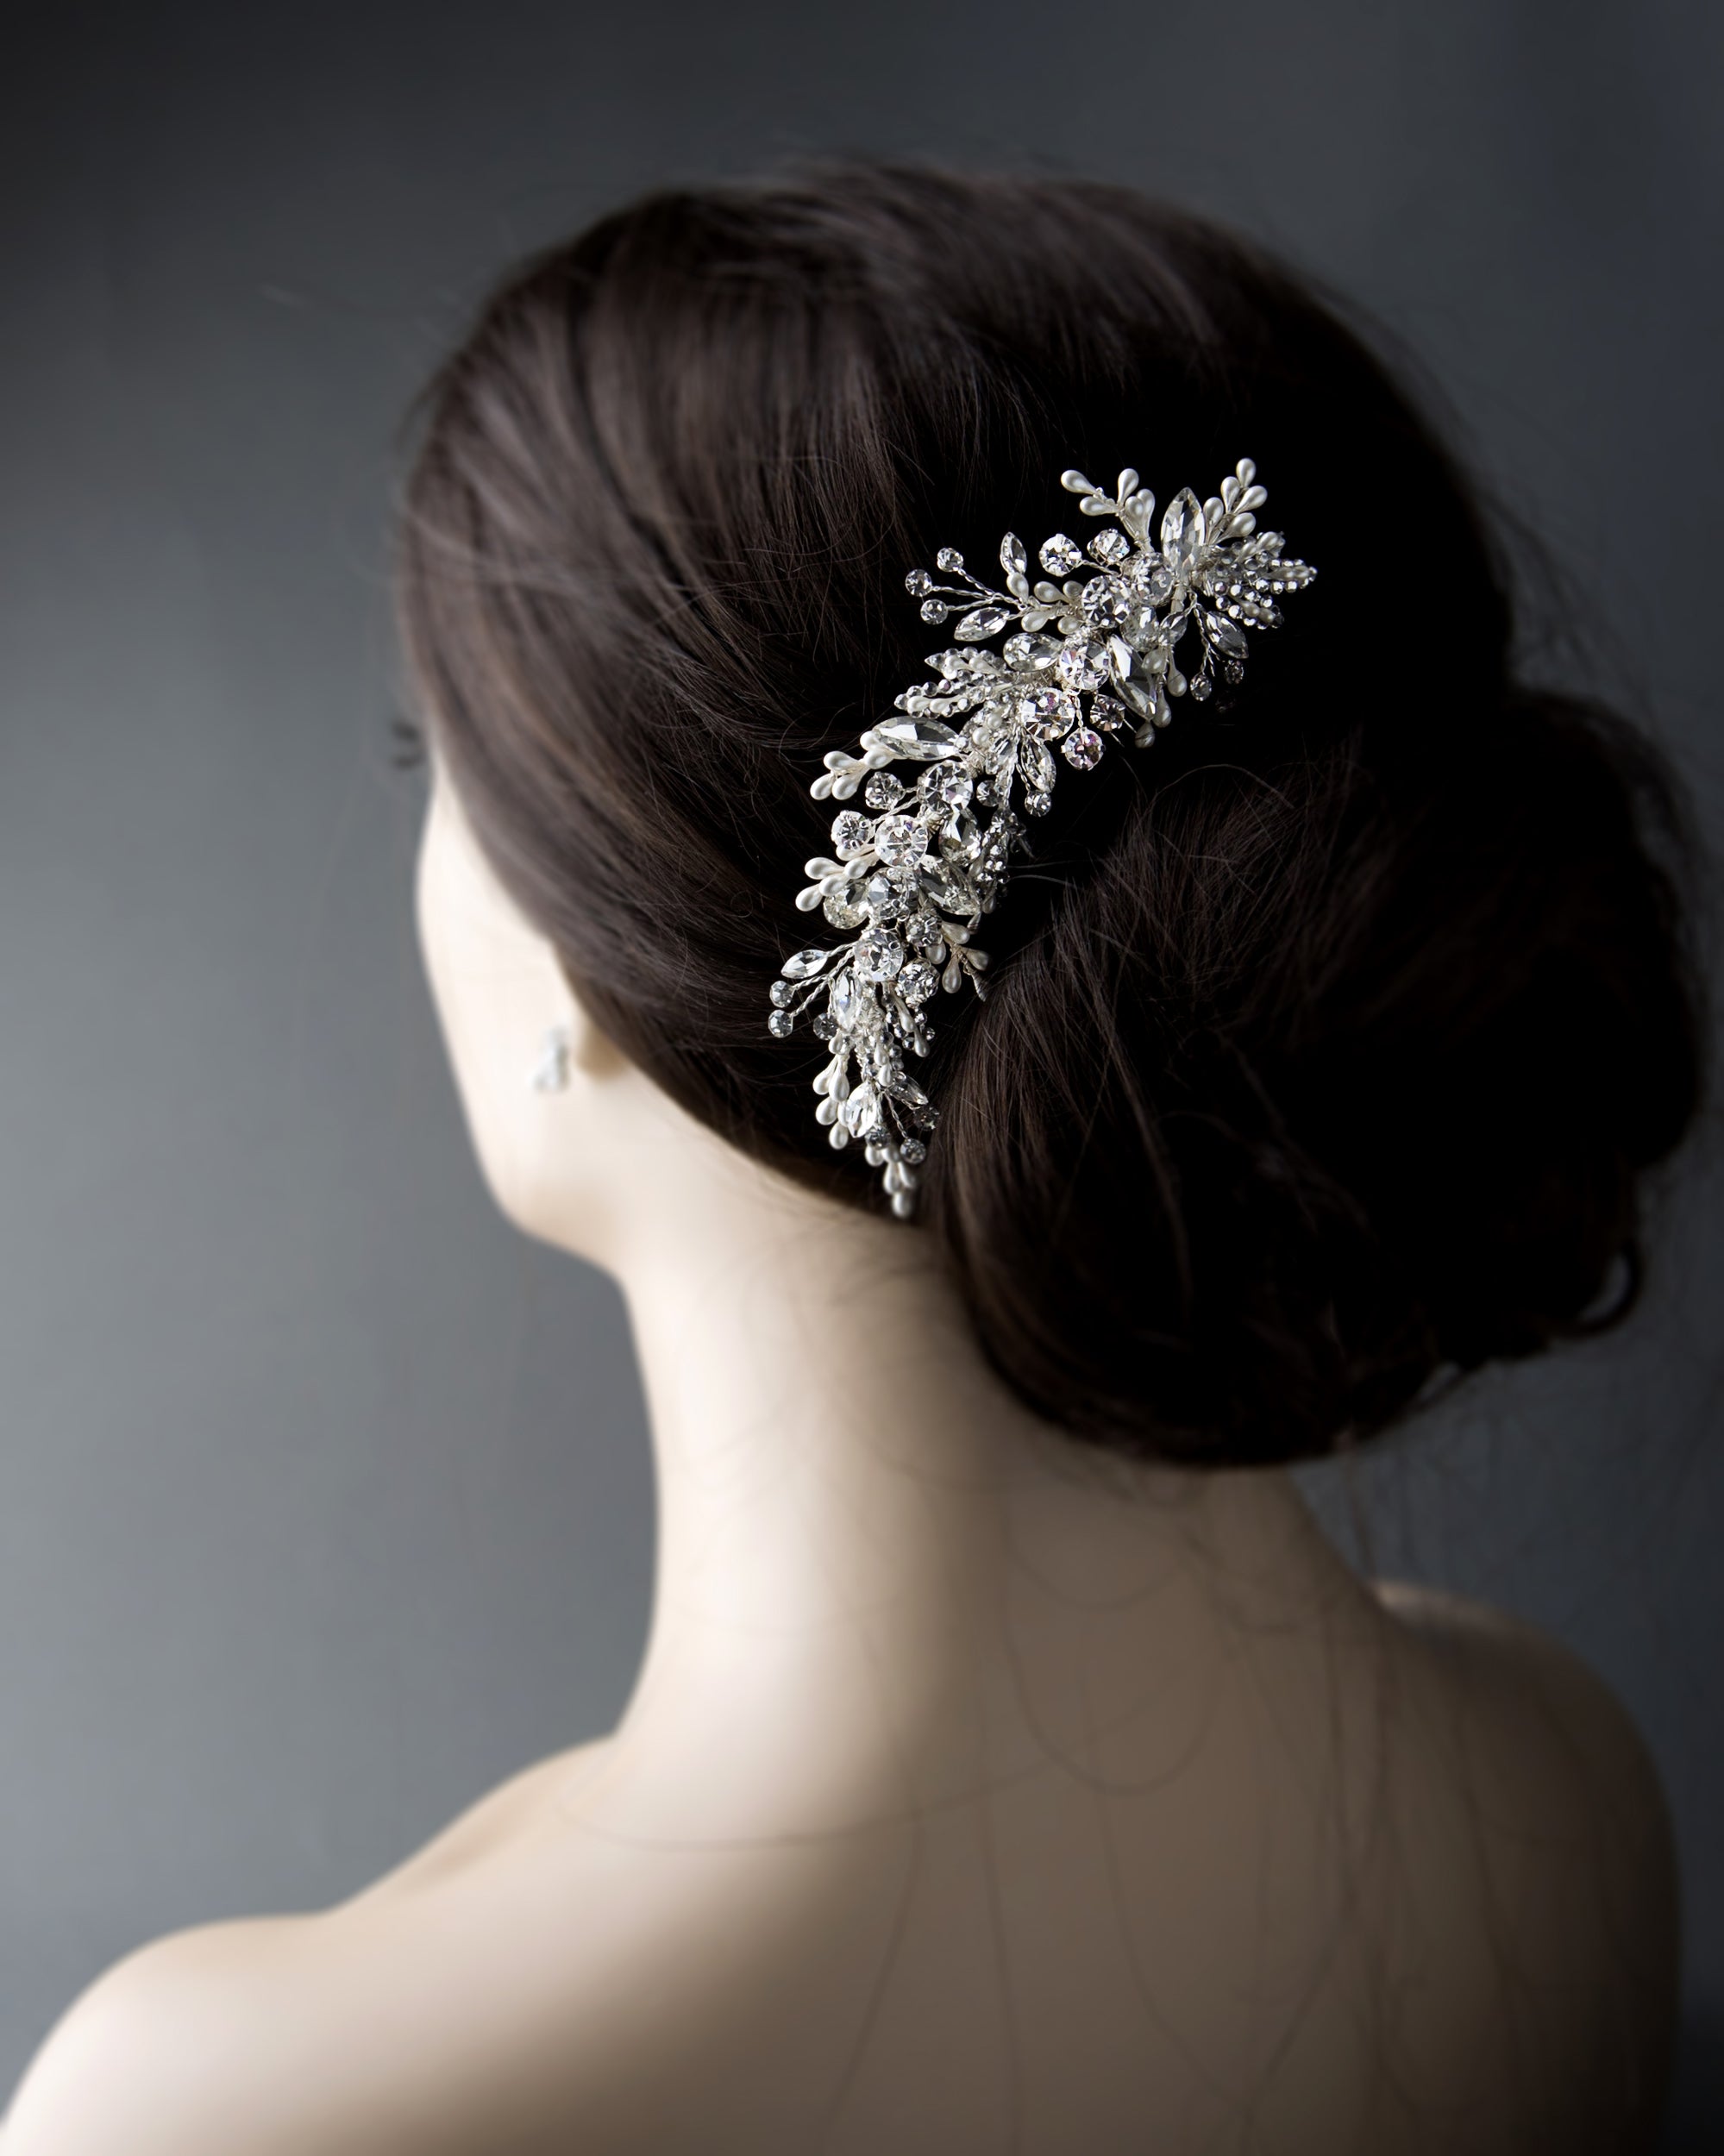 Sparkling Wedding Hair Comb with Pearl Drops - Cassandra Lynne